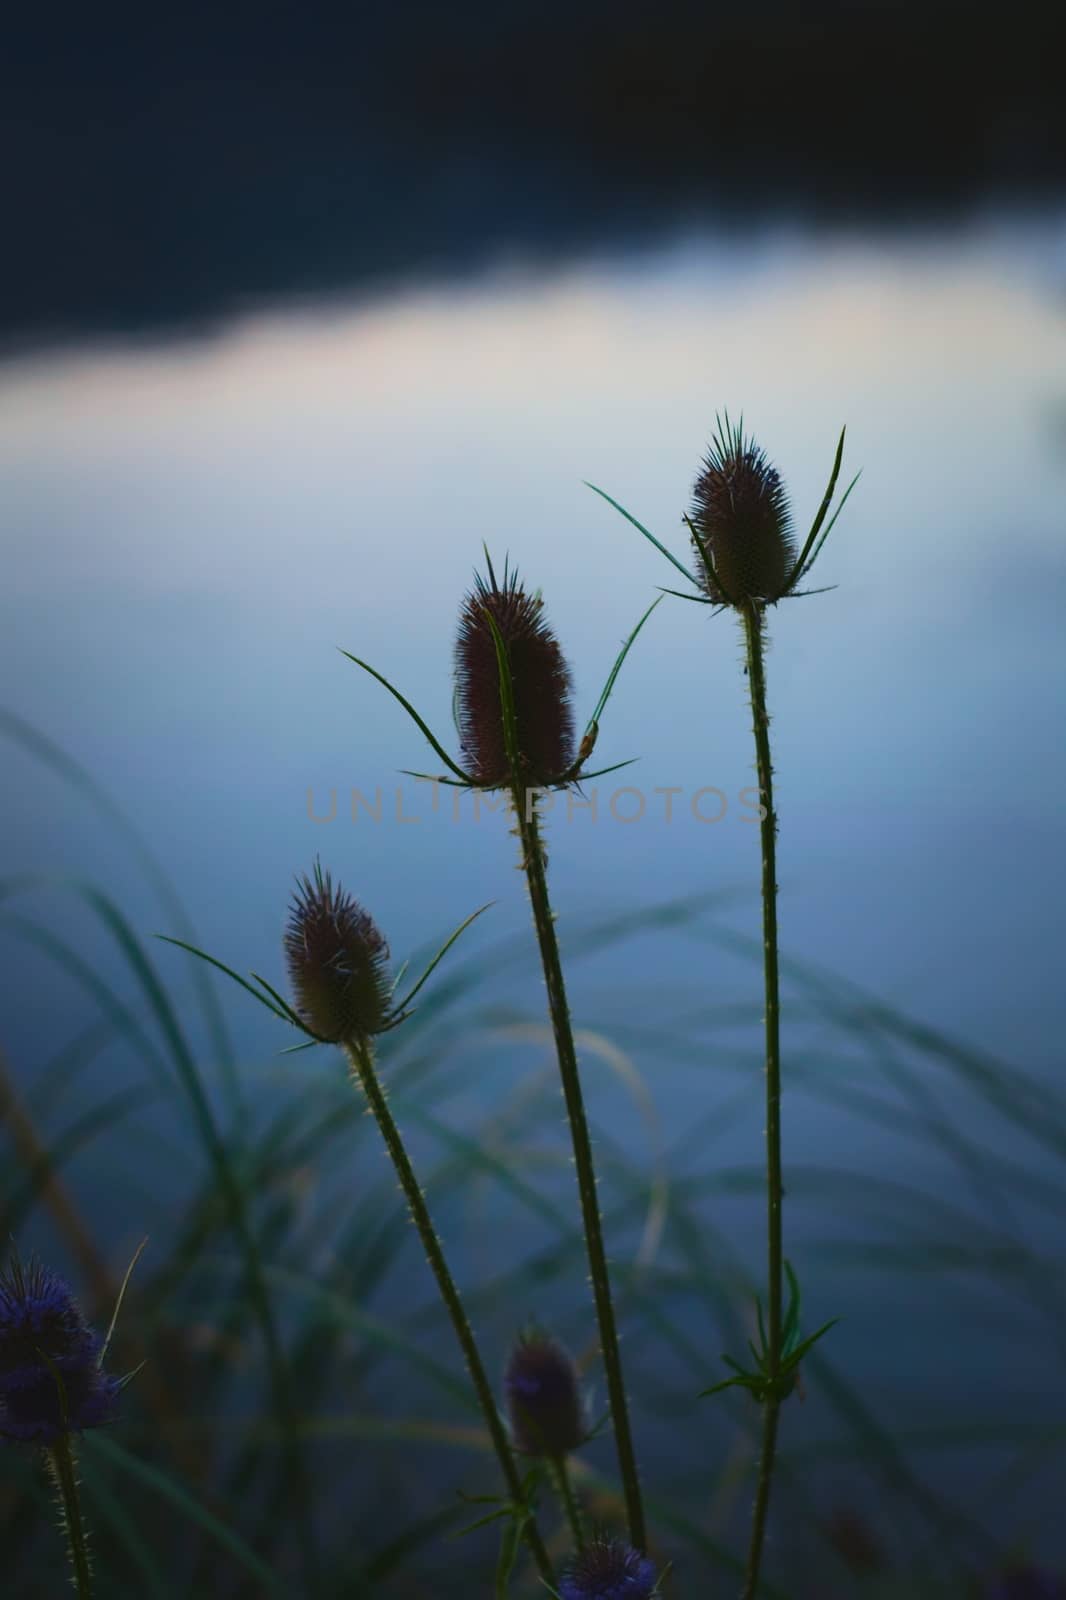 Thistles and long grass silhouetted against the reflections of the twilight sky by hernan_hyper